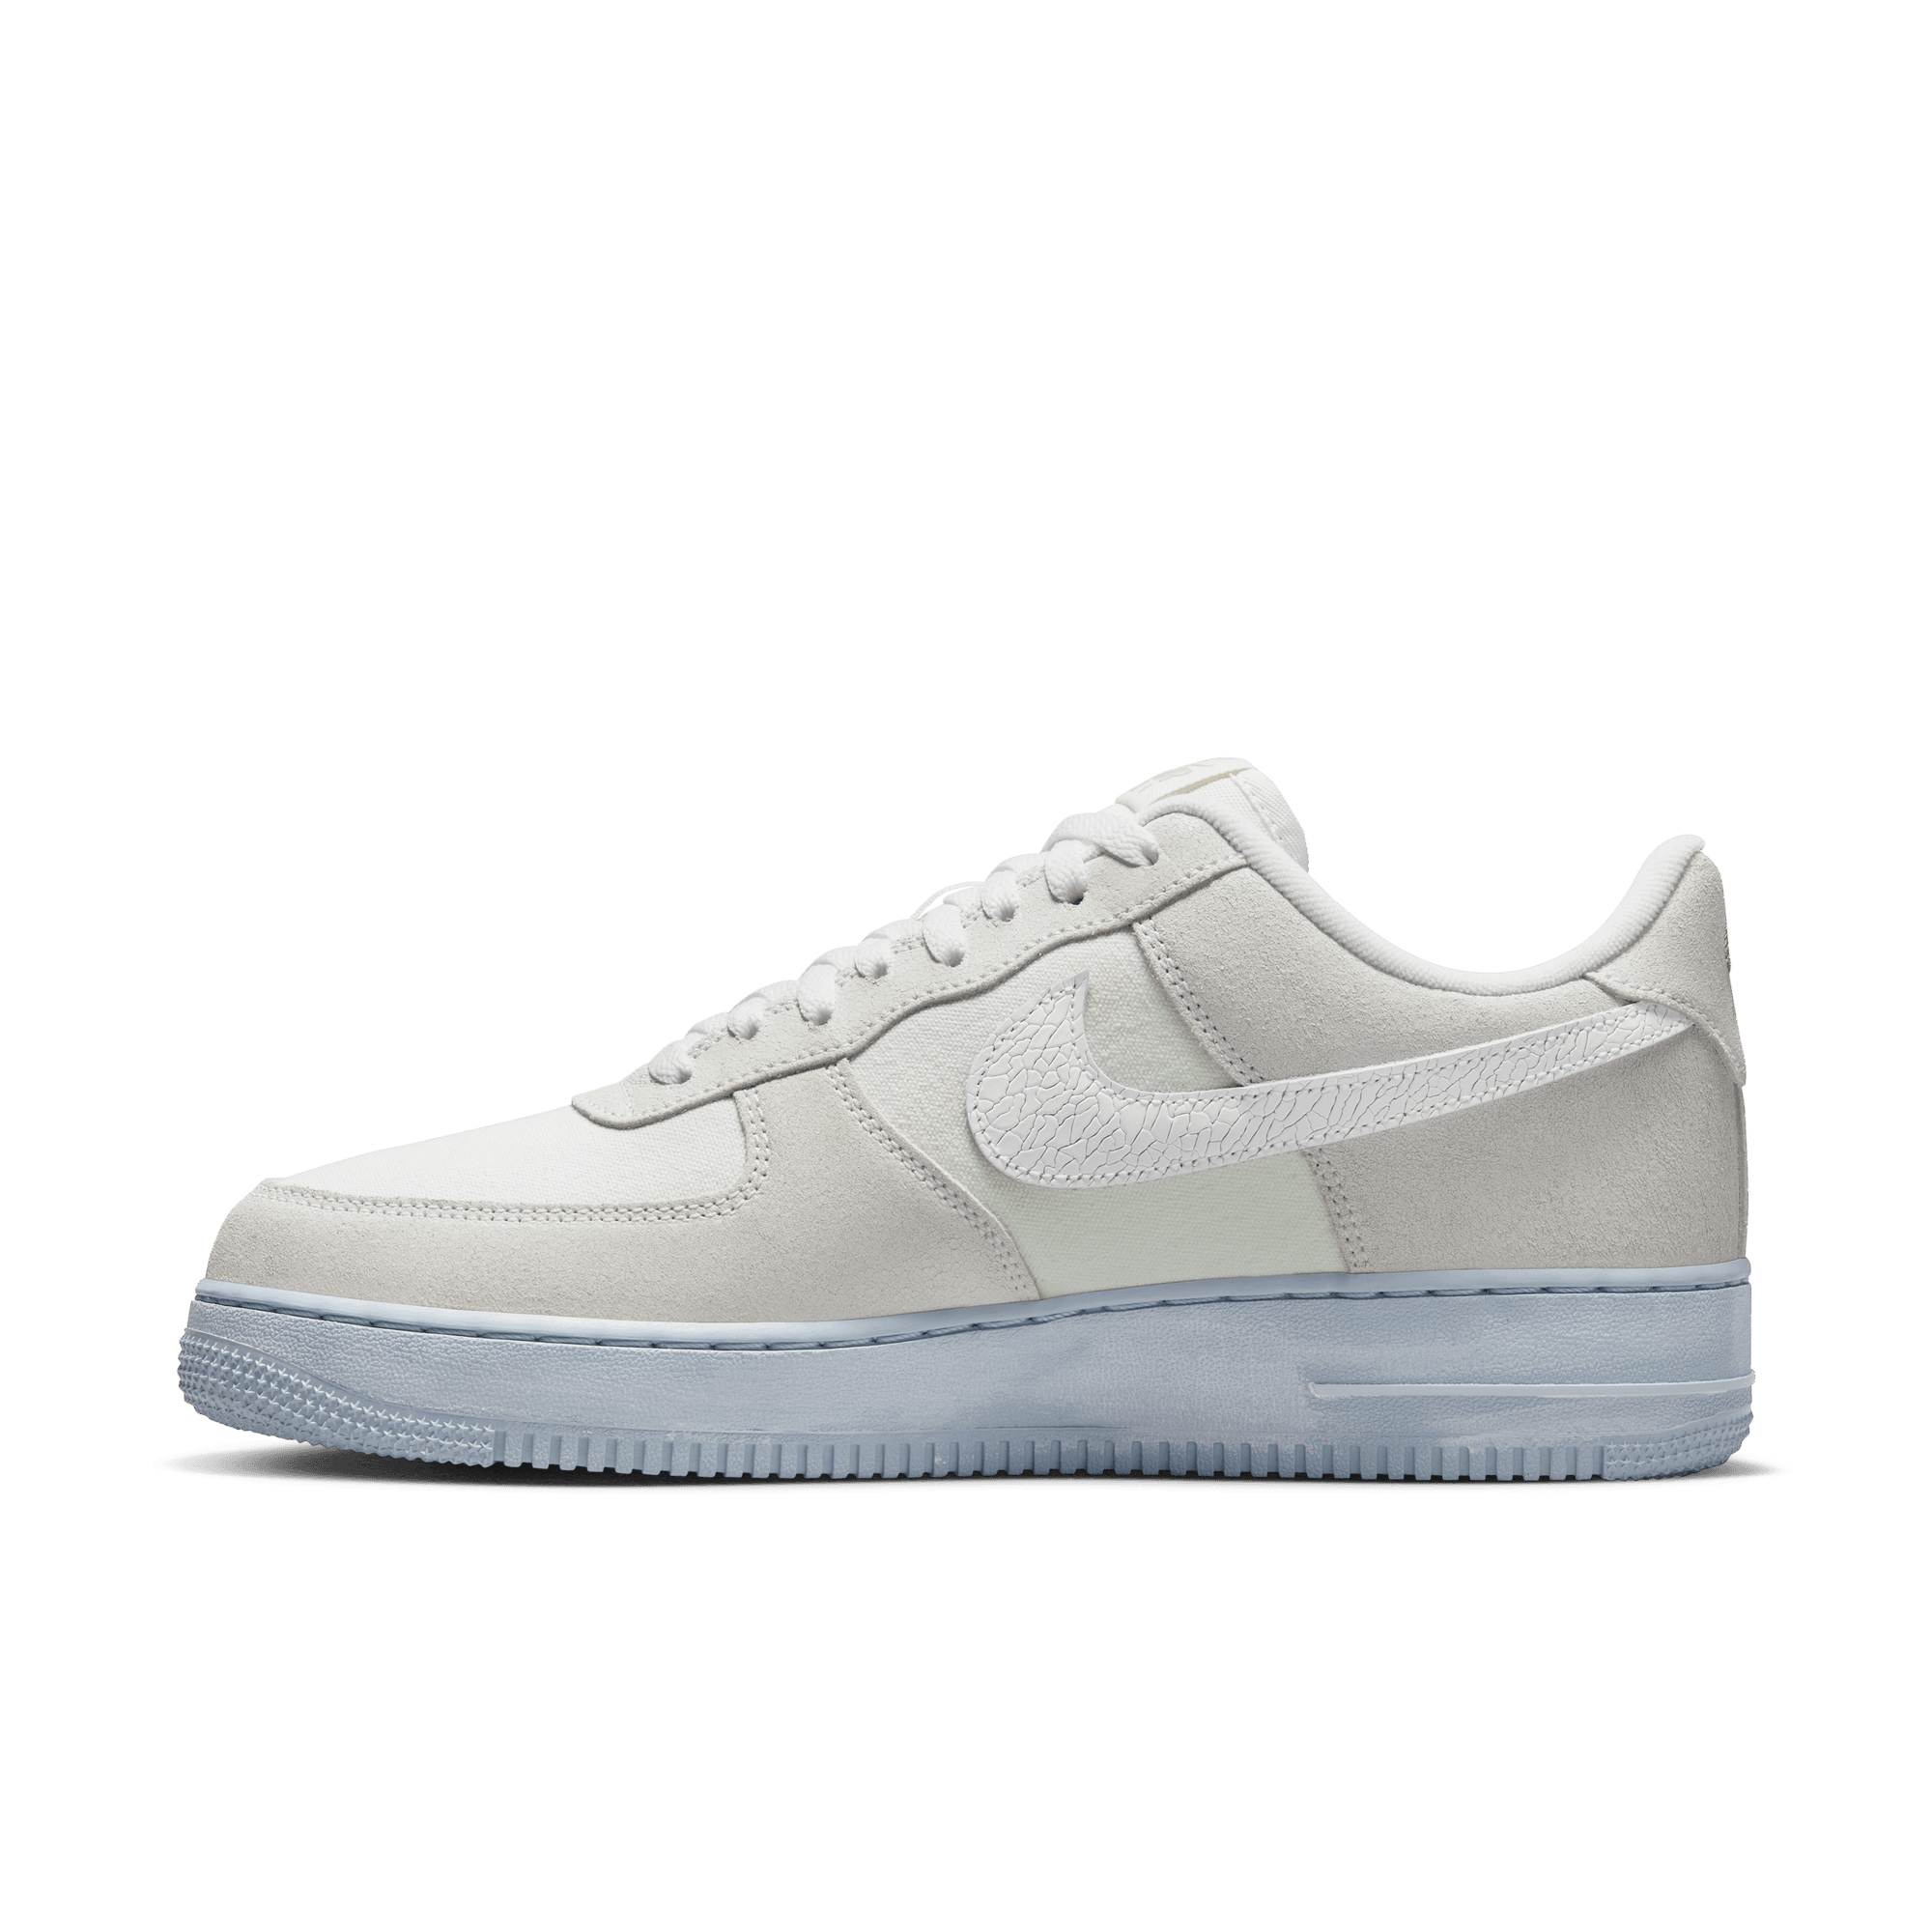 Men's Nike Air Force 1 '07 LV8 Shoes, 10.5, White